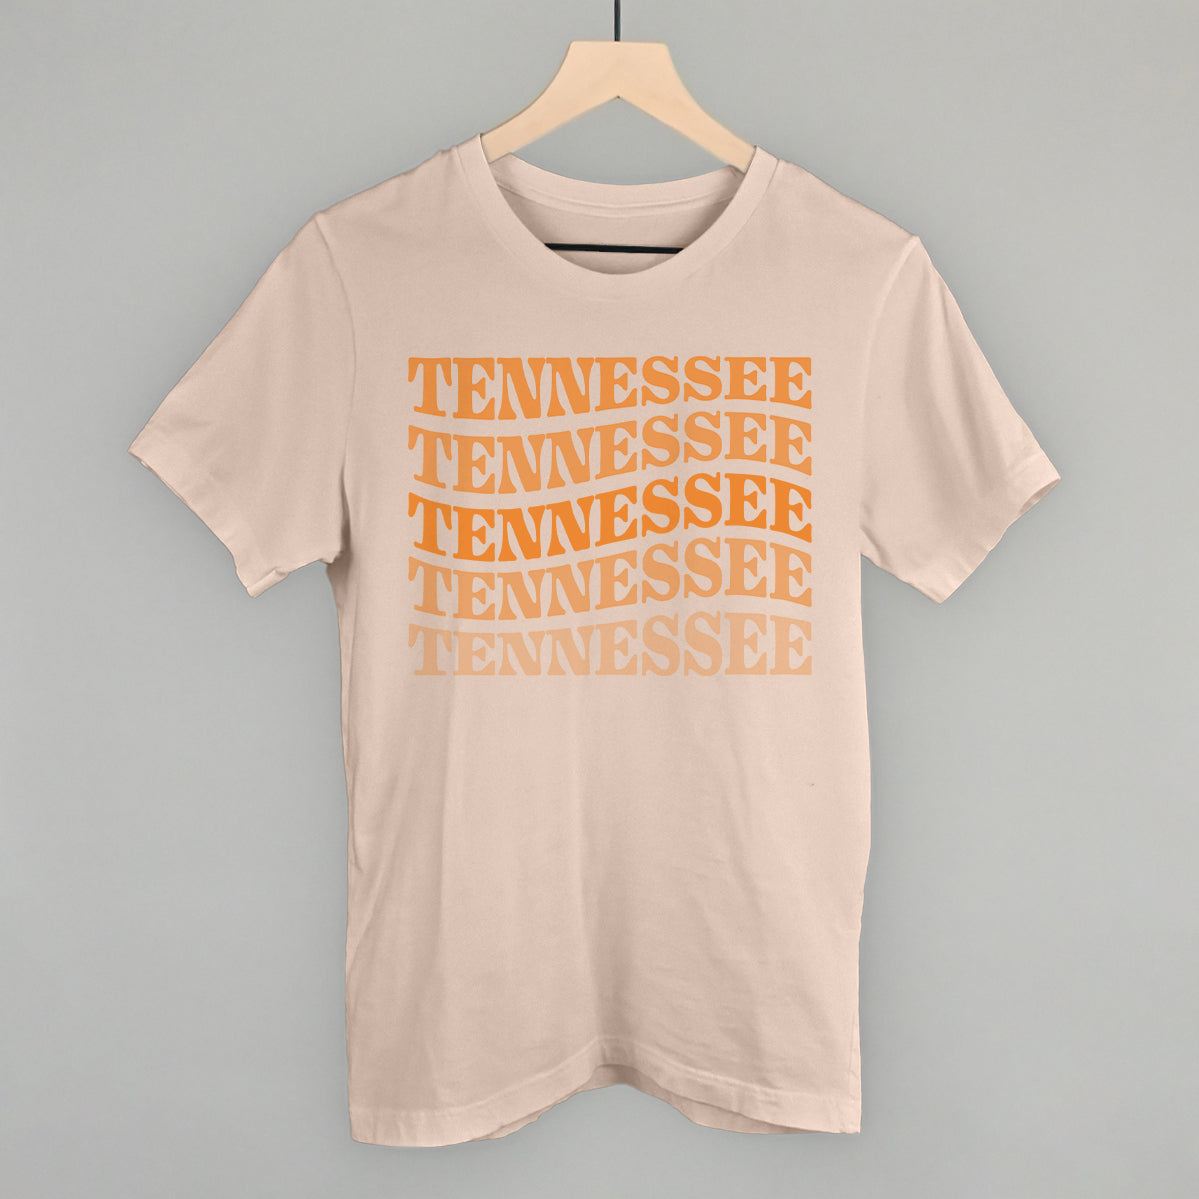 Tennessee (Repeated Wave)